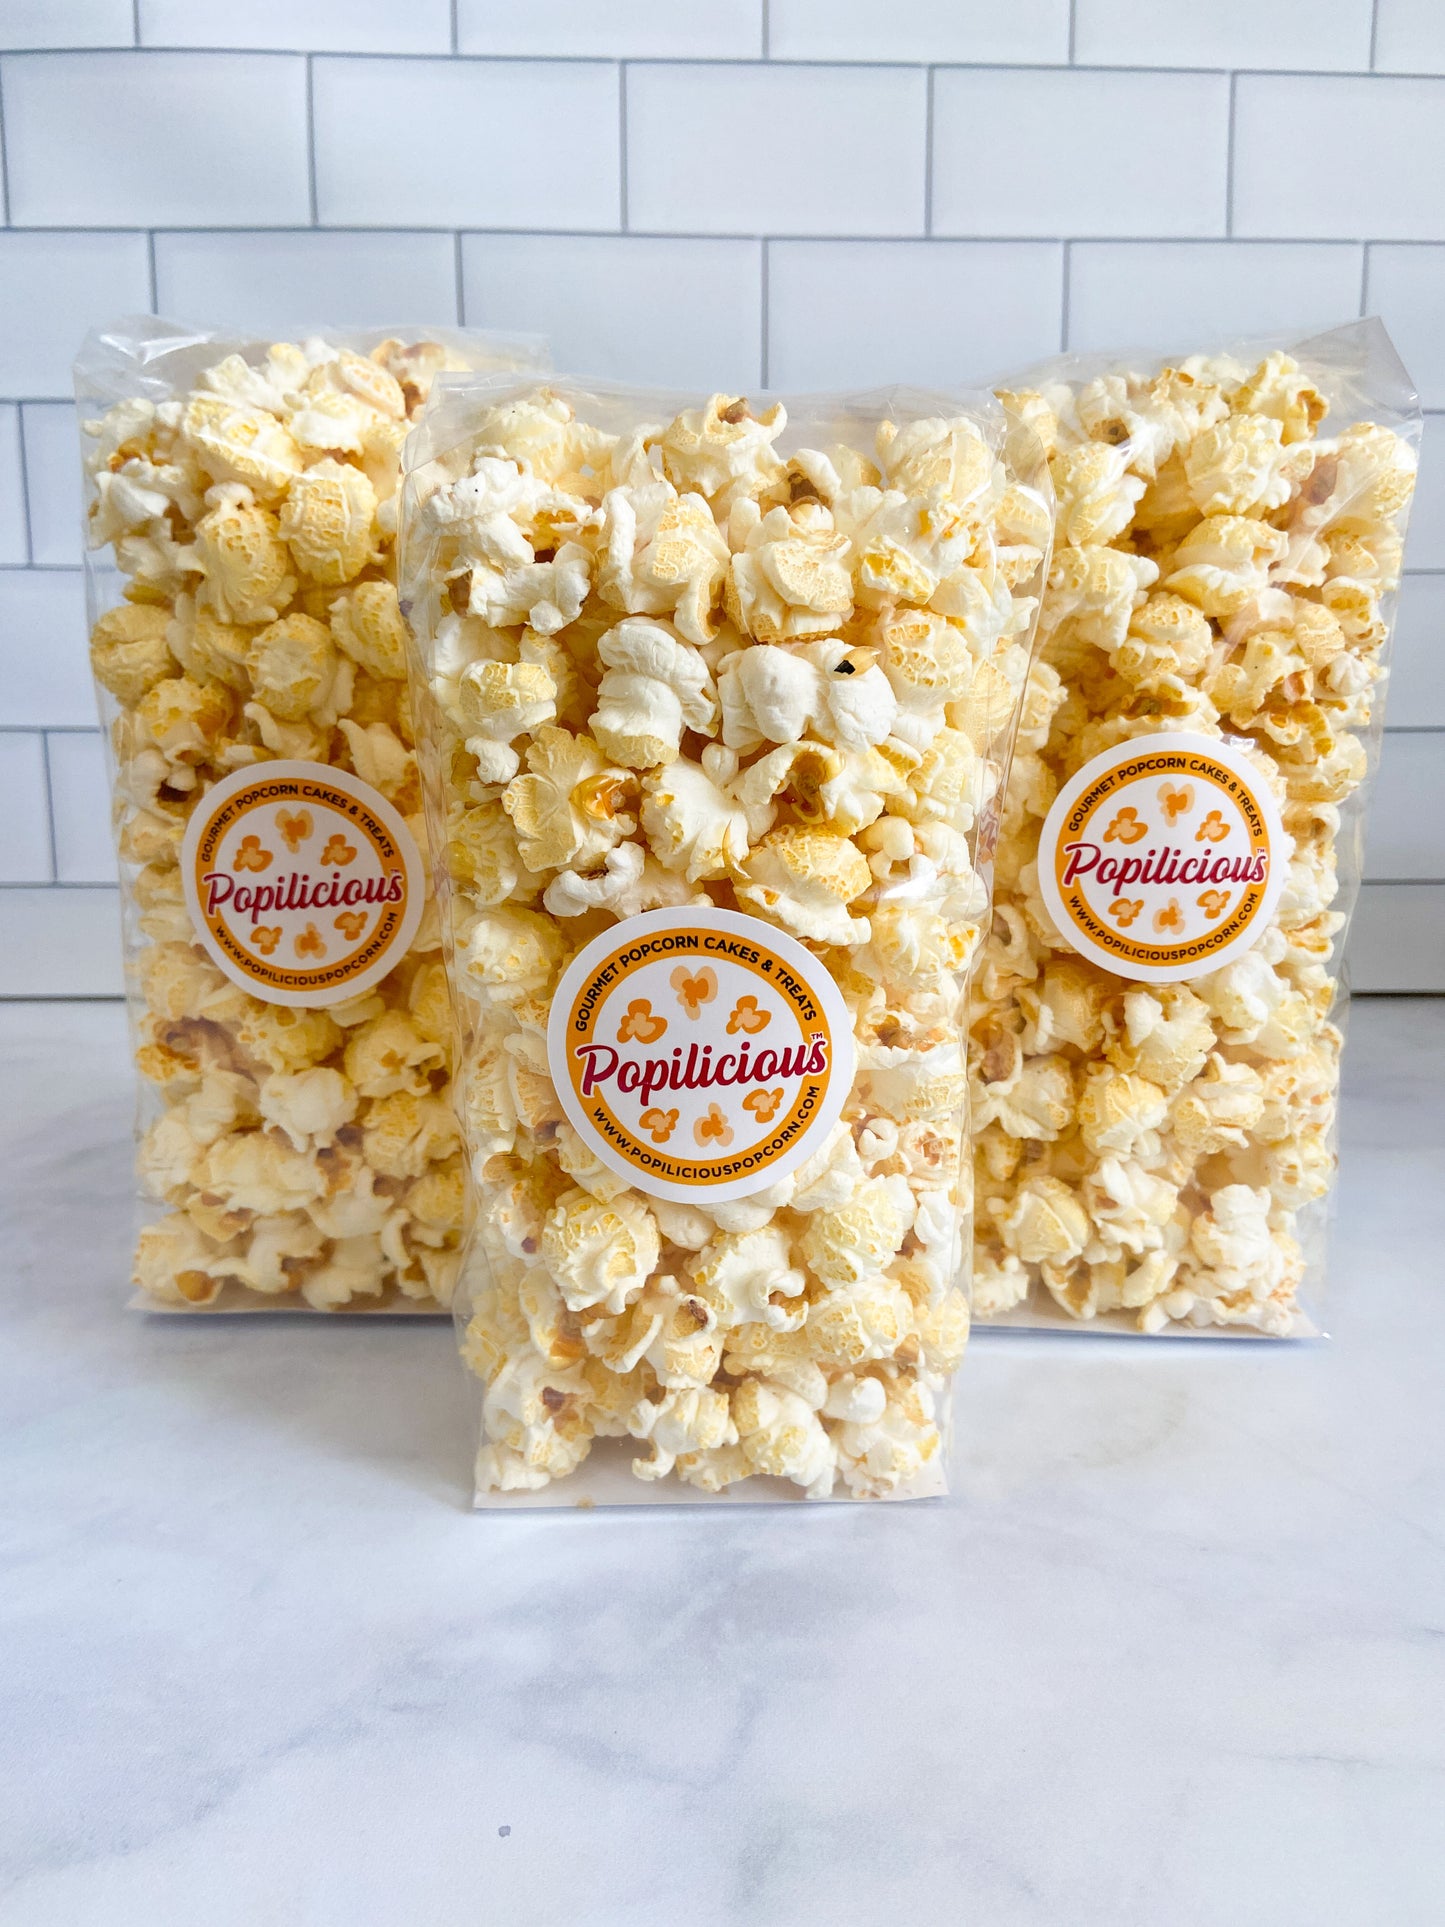 Round of Applause Theater Style Gourmet Popcorn